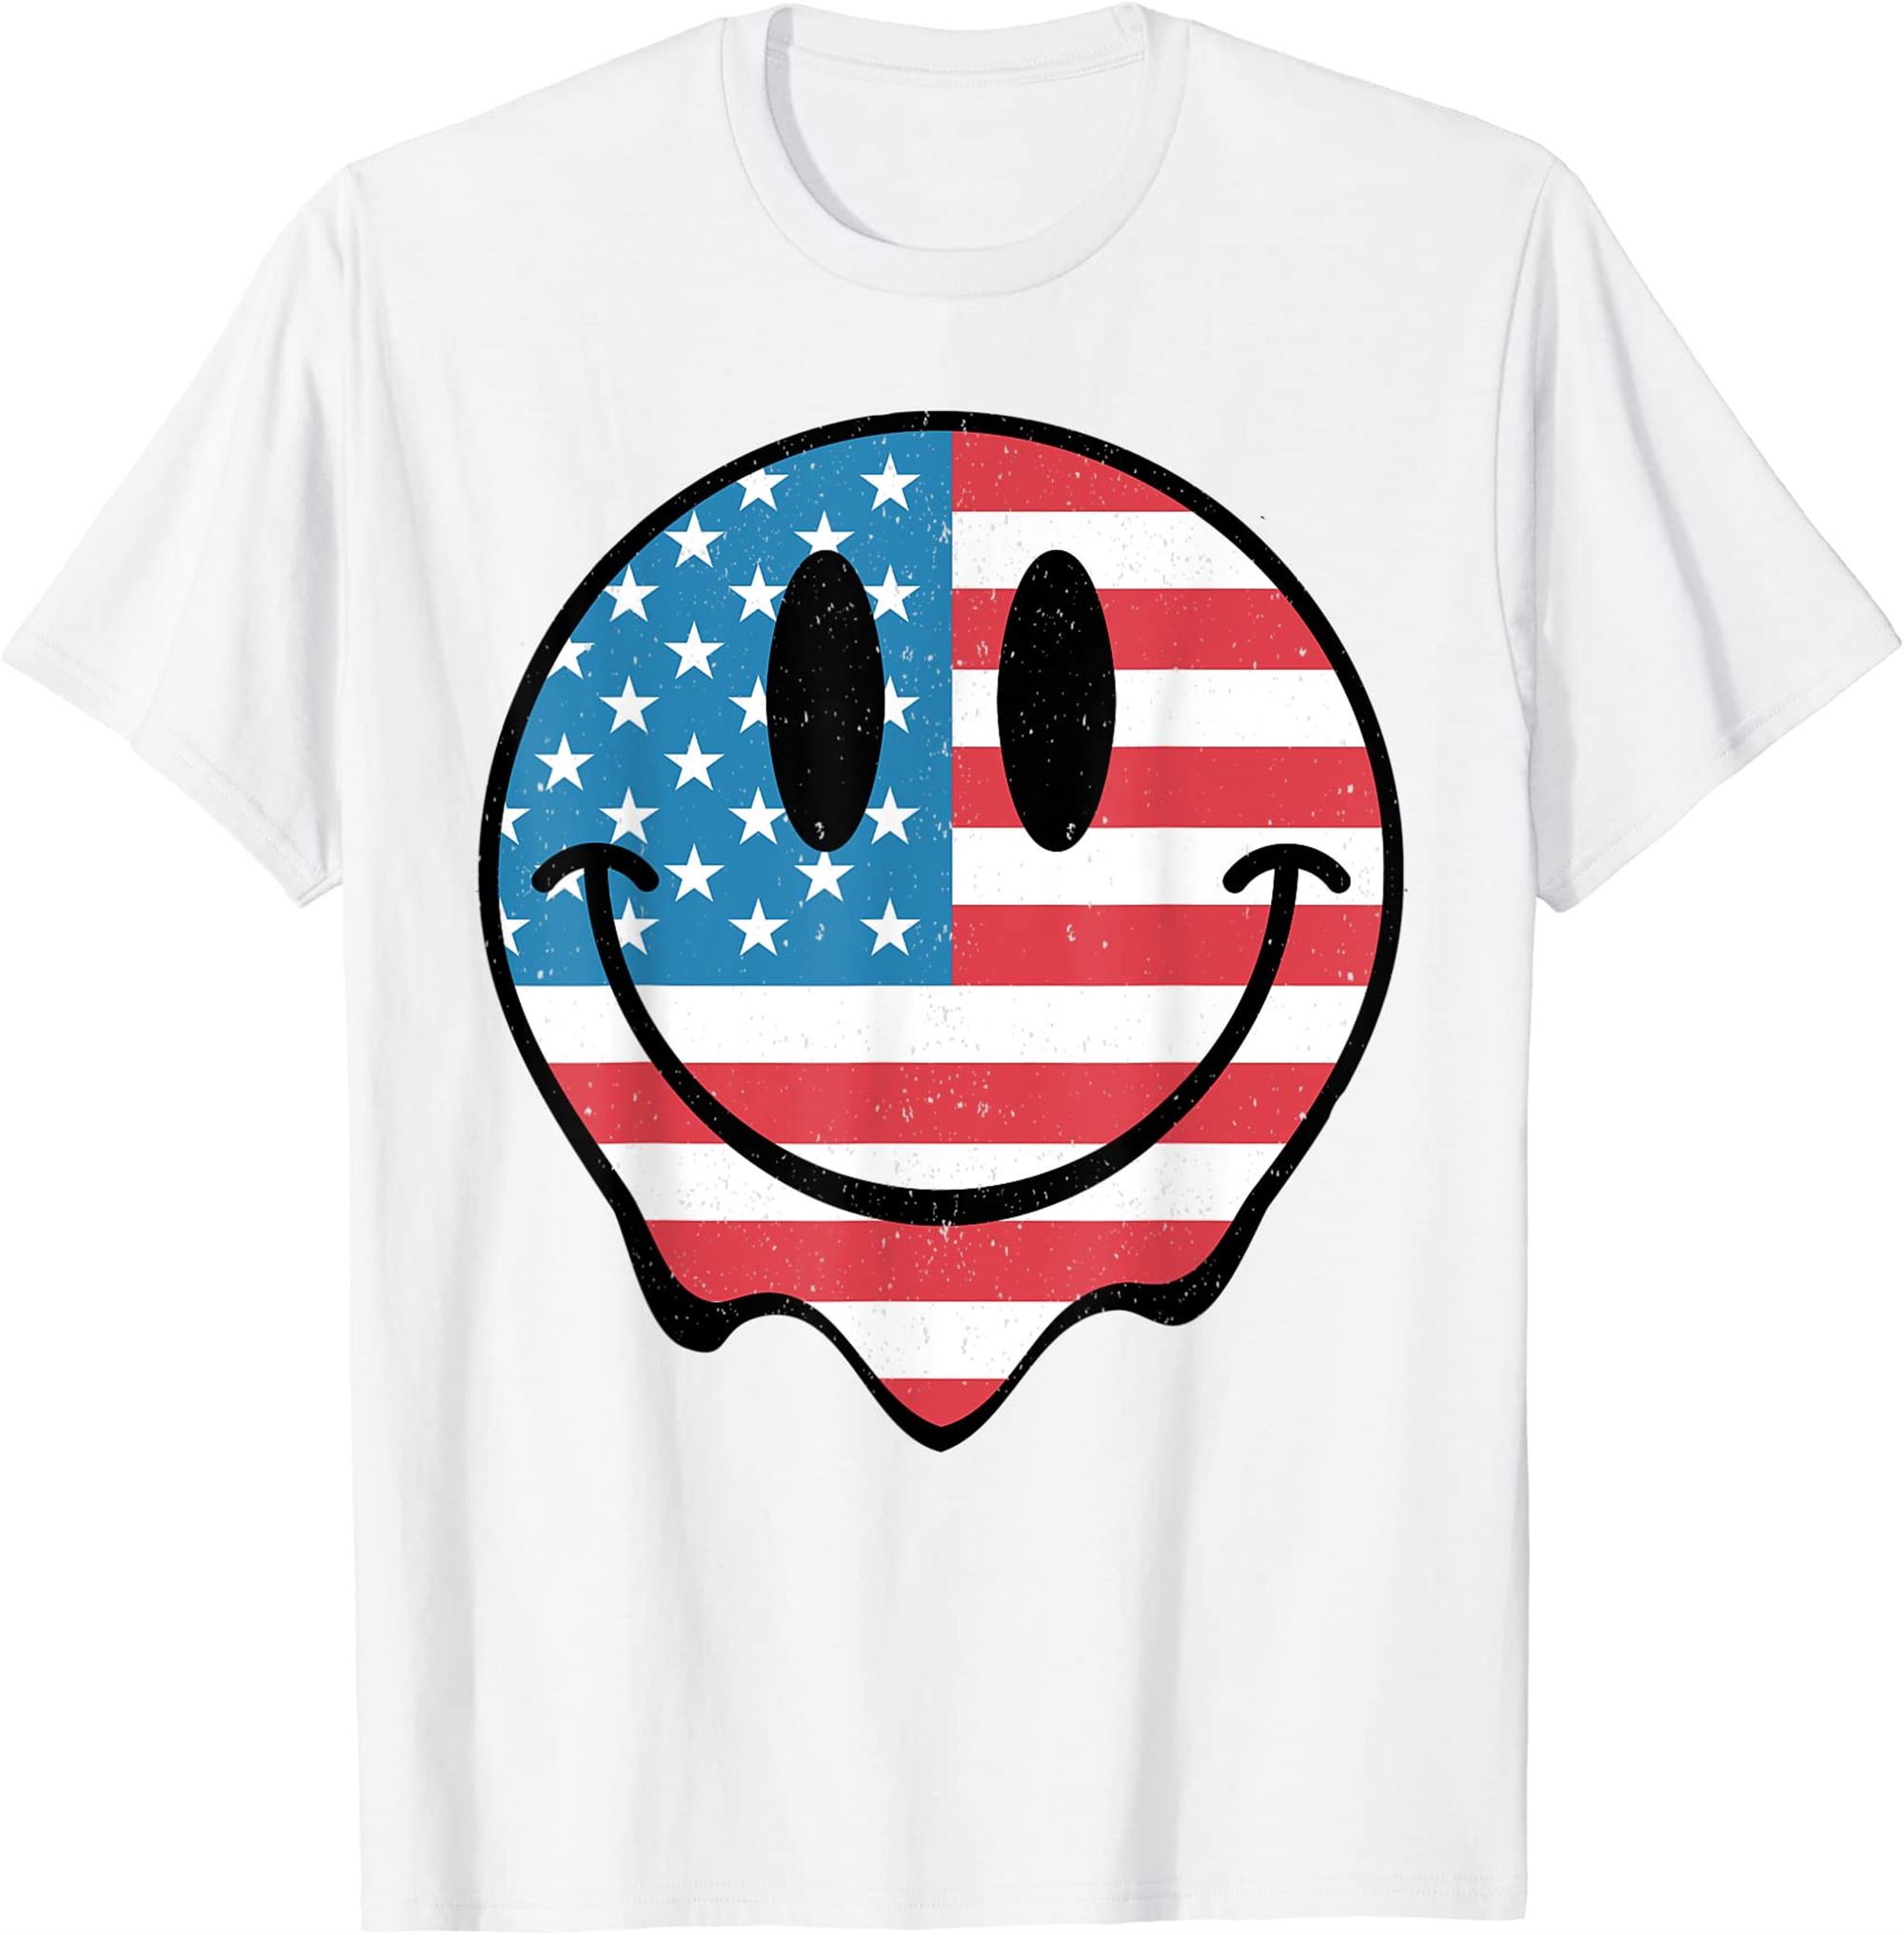 Smiley Face American Flag 4th July Boys Girls Kids Toddler T-shirt Size Up To 5xl